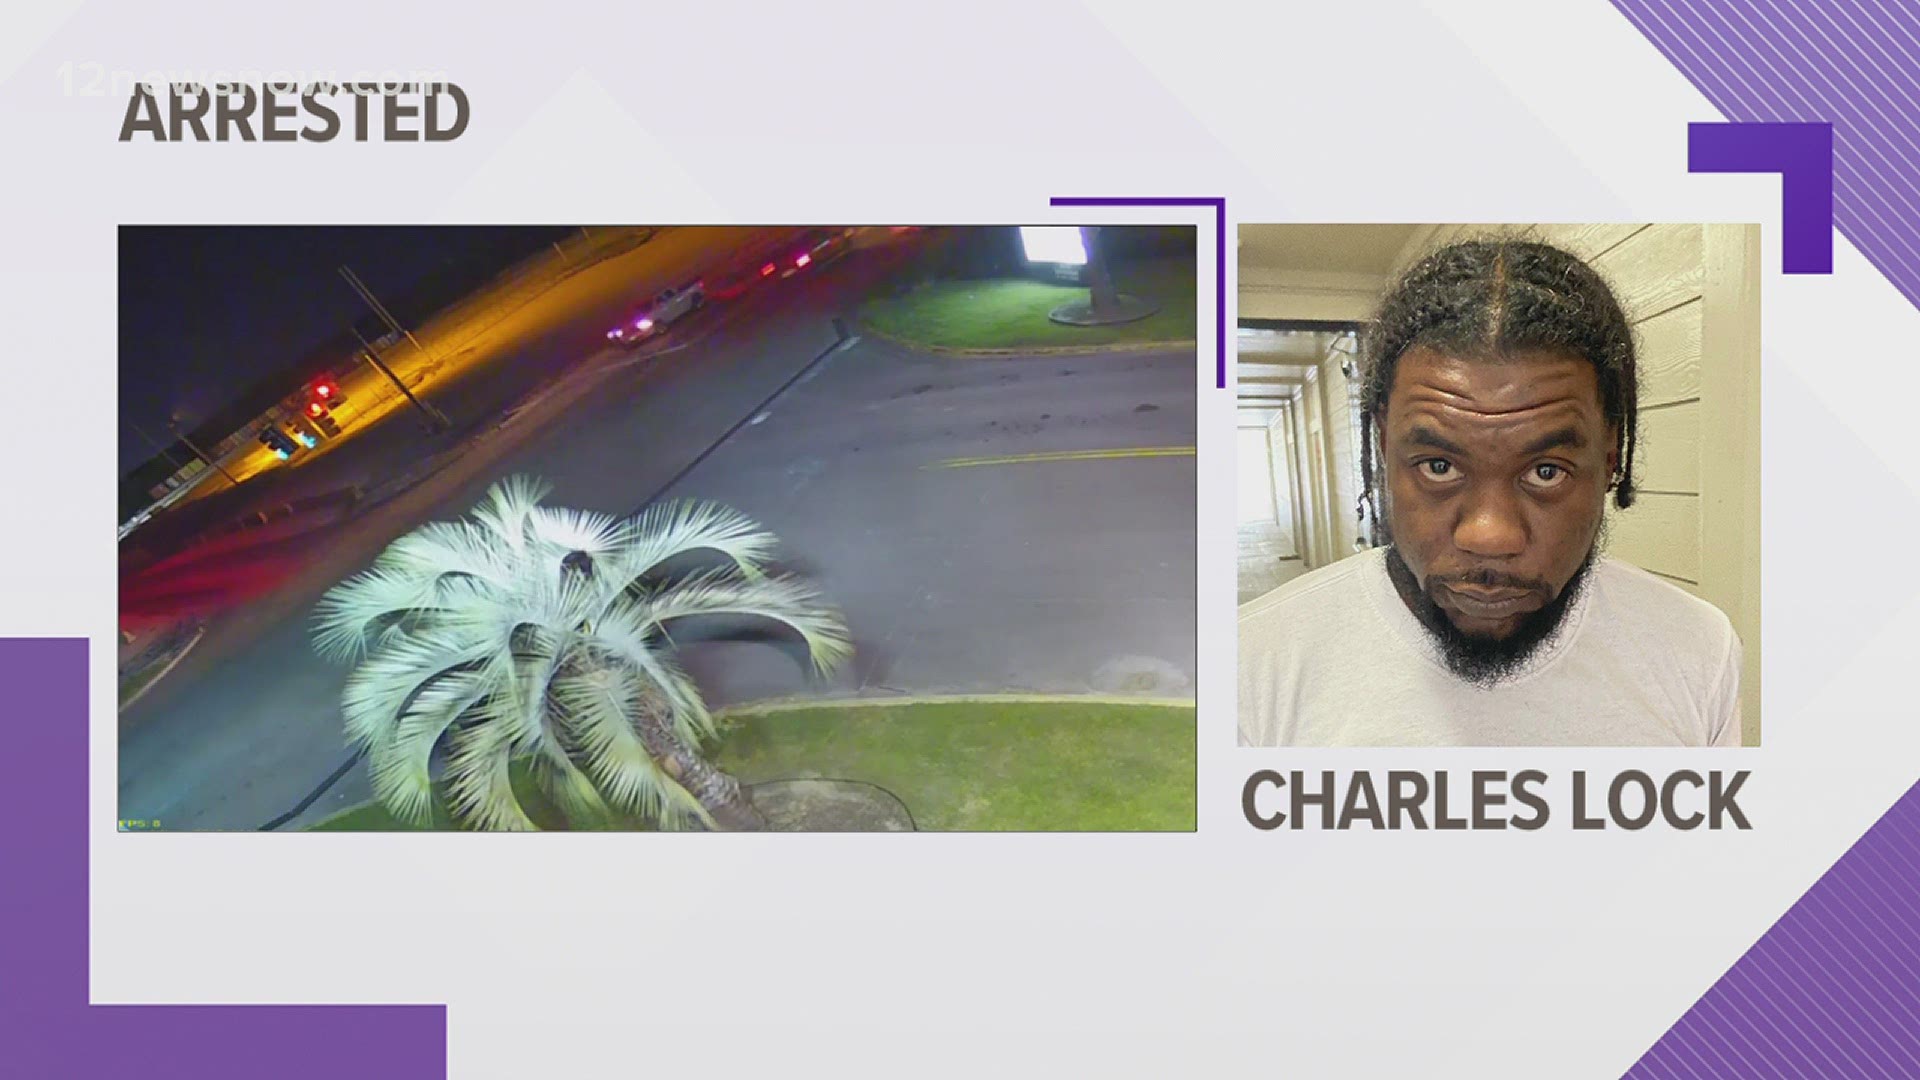 Charles Lock, 33, is a person of interest for the 2019 hit-and-run death of 40-year-old Port Arthur resident Jamica Thibo.